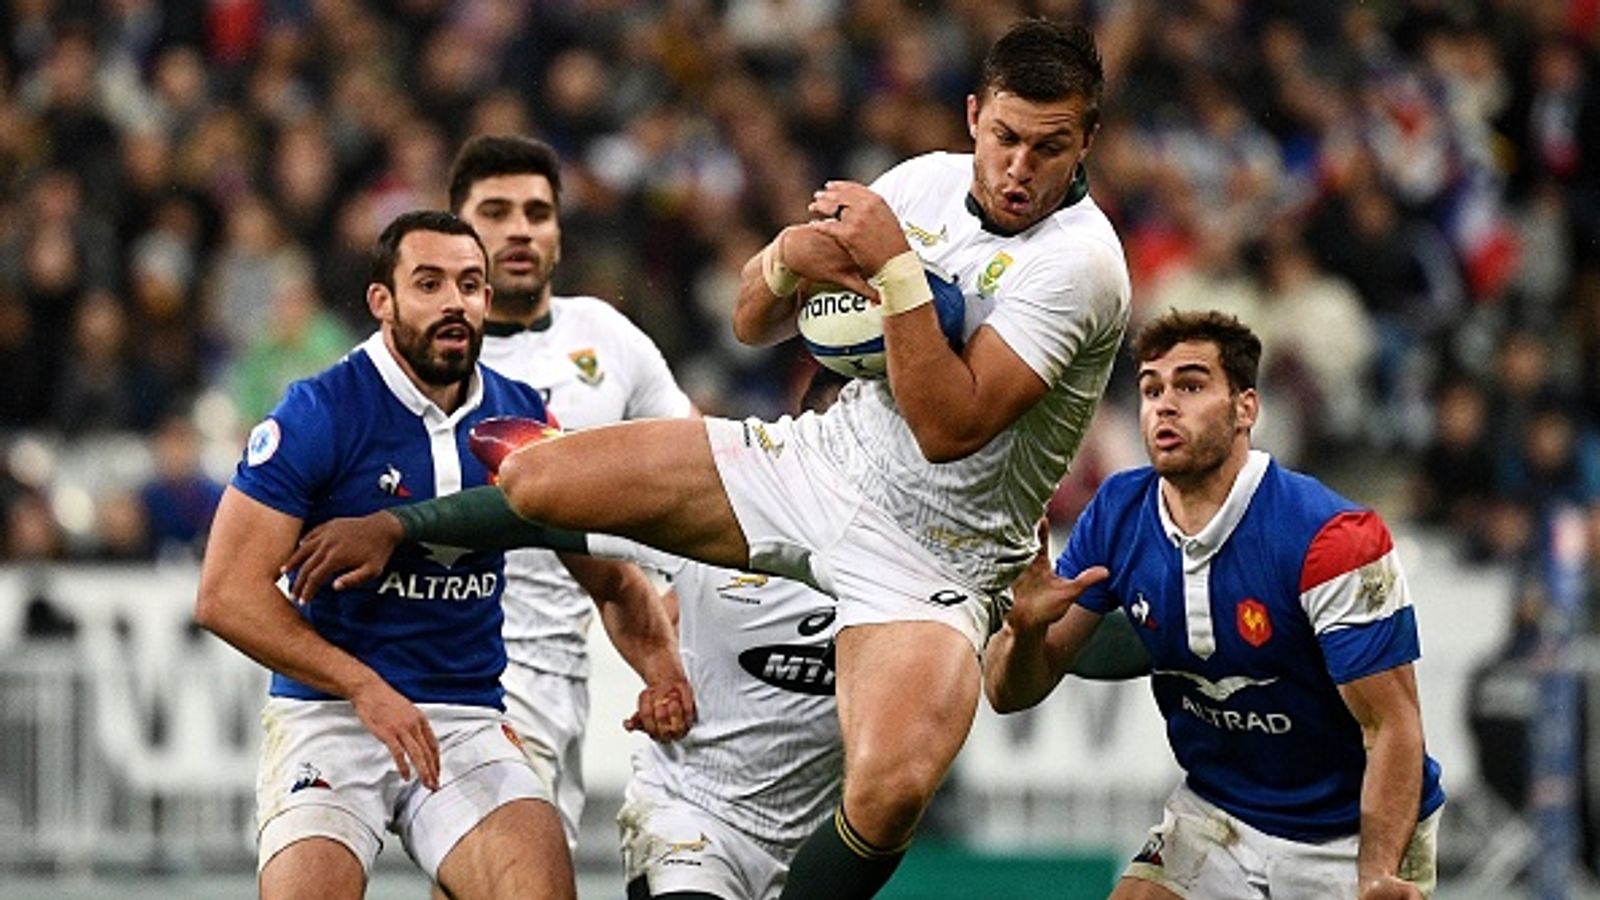 France 26 - 29 South Africa - Match Report & Highlights